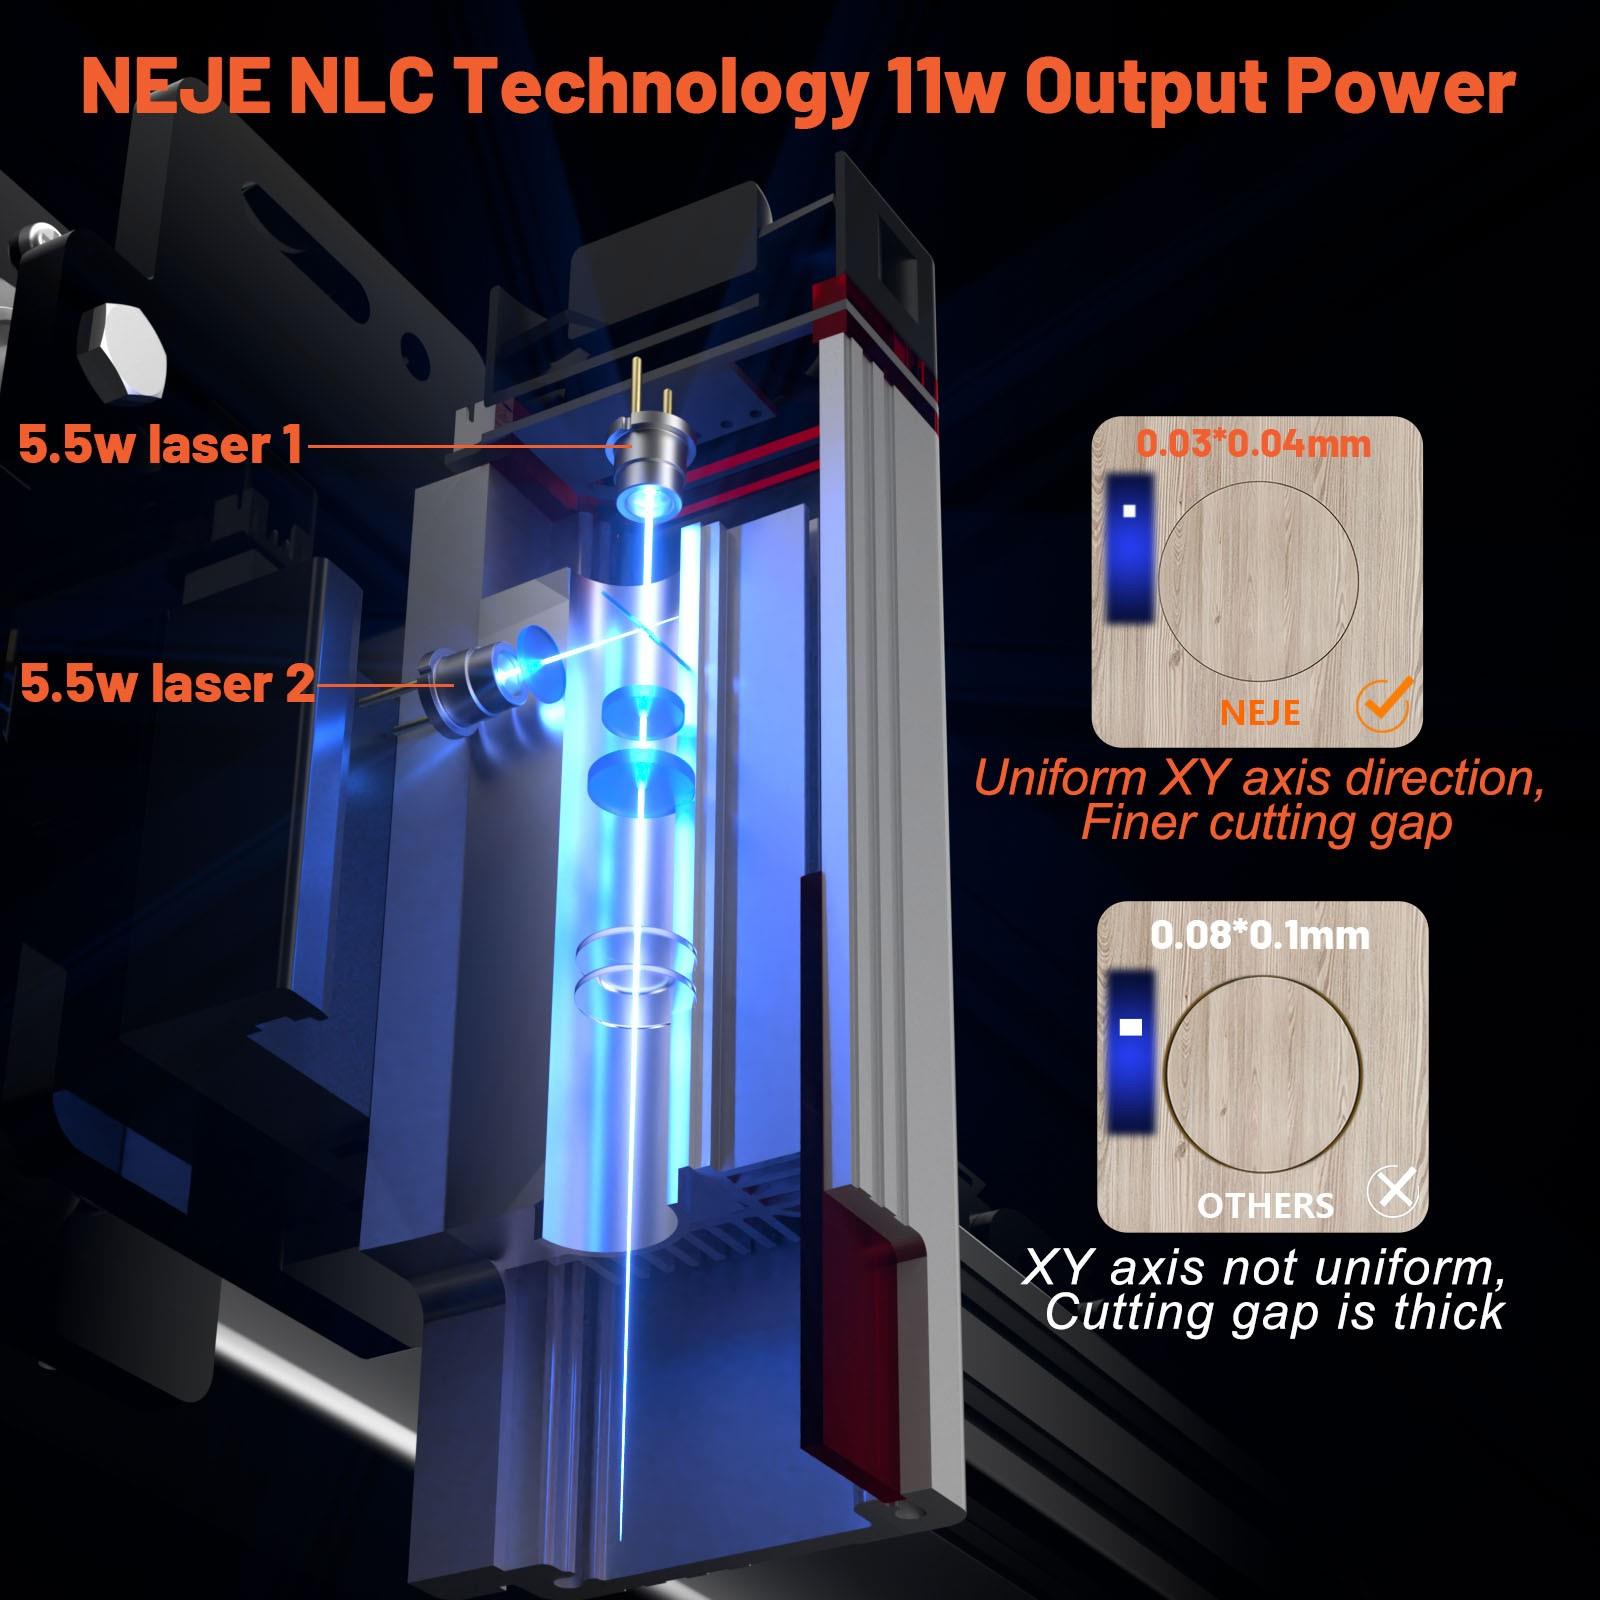 NEJE 3 E40 11W Laser Engraver Cutter, Max Printing Speed 400mm/s, Vertical Carving, App Control, 170x170mm